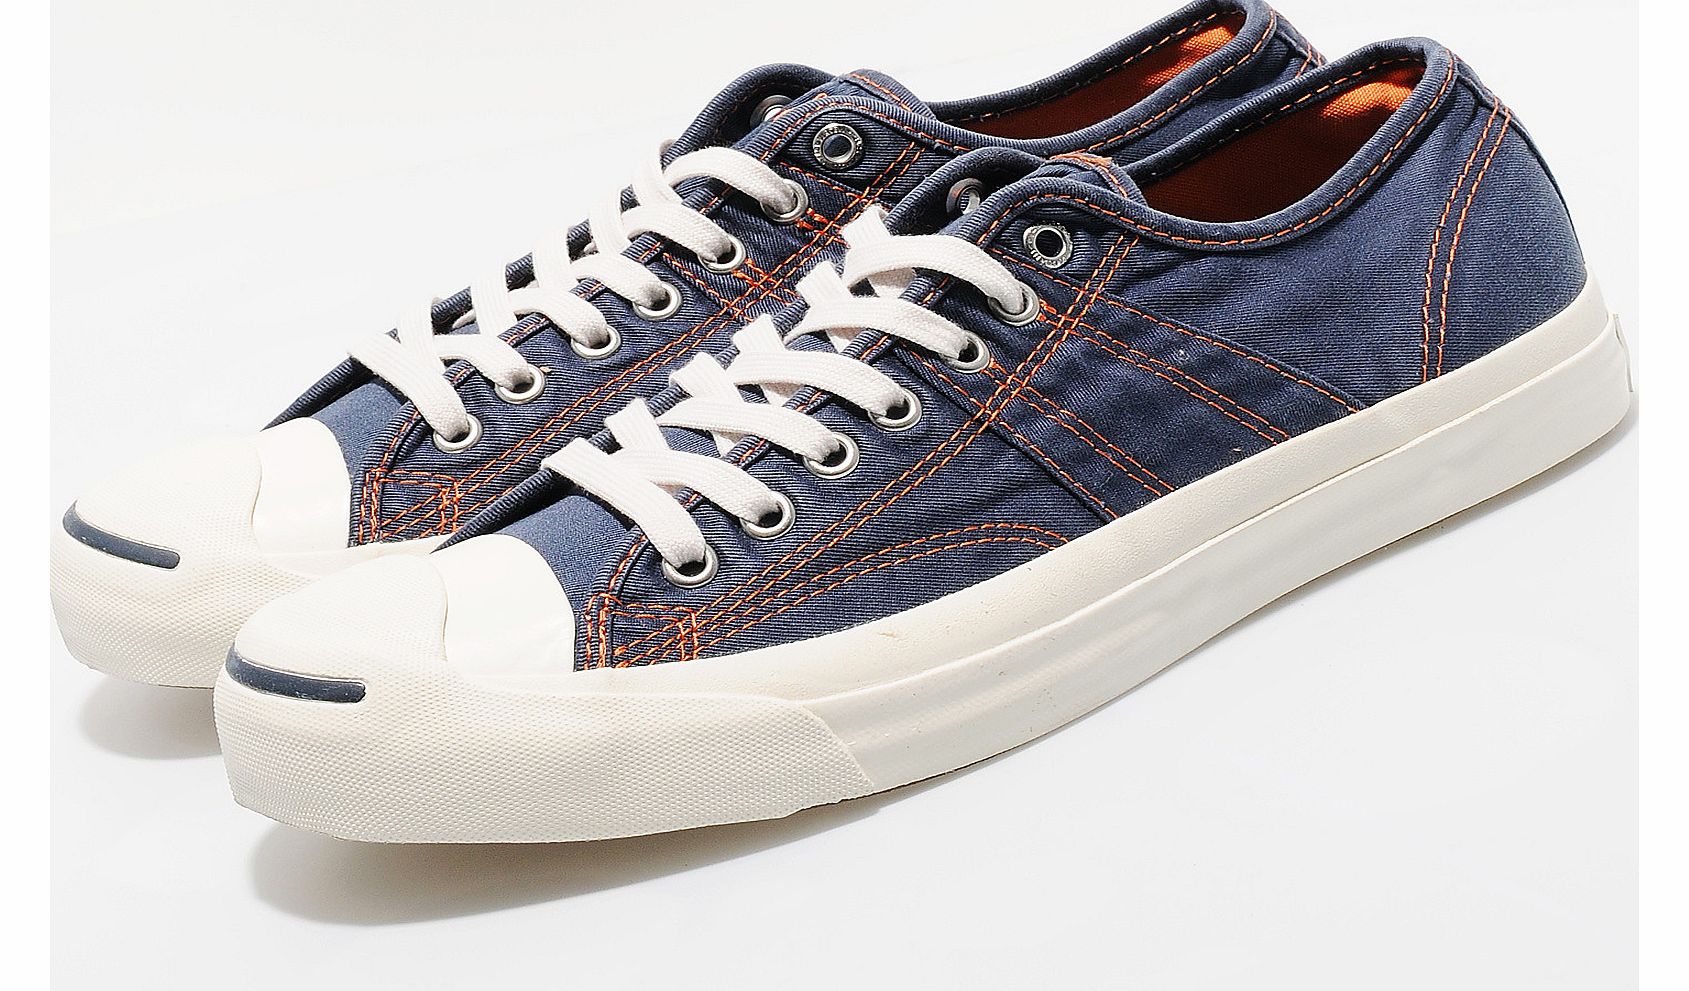 Converse Jack Purcell Johnny Ox